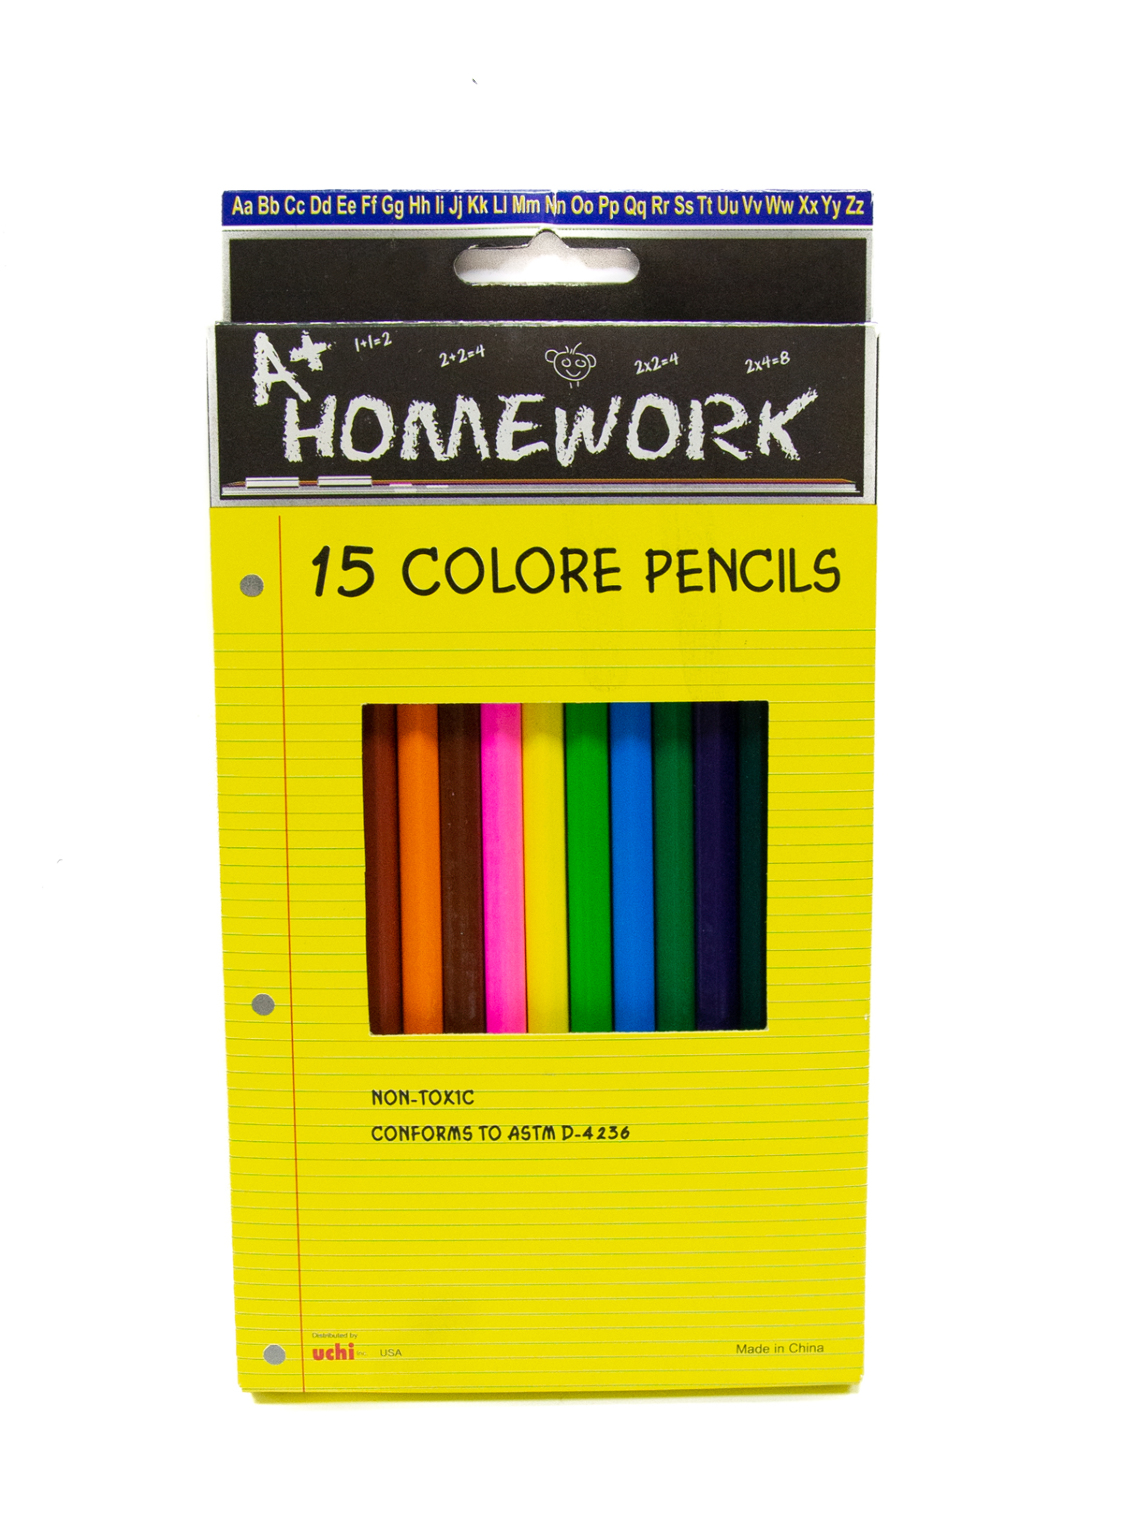 15 Jumbo Coloring Pencils With Color Names, Coloring Pencil, Back to  School, Crayons, Personalized Pencils, School Supplies, Color Blindness 